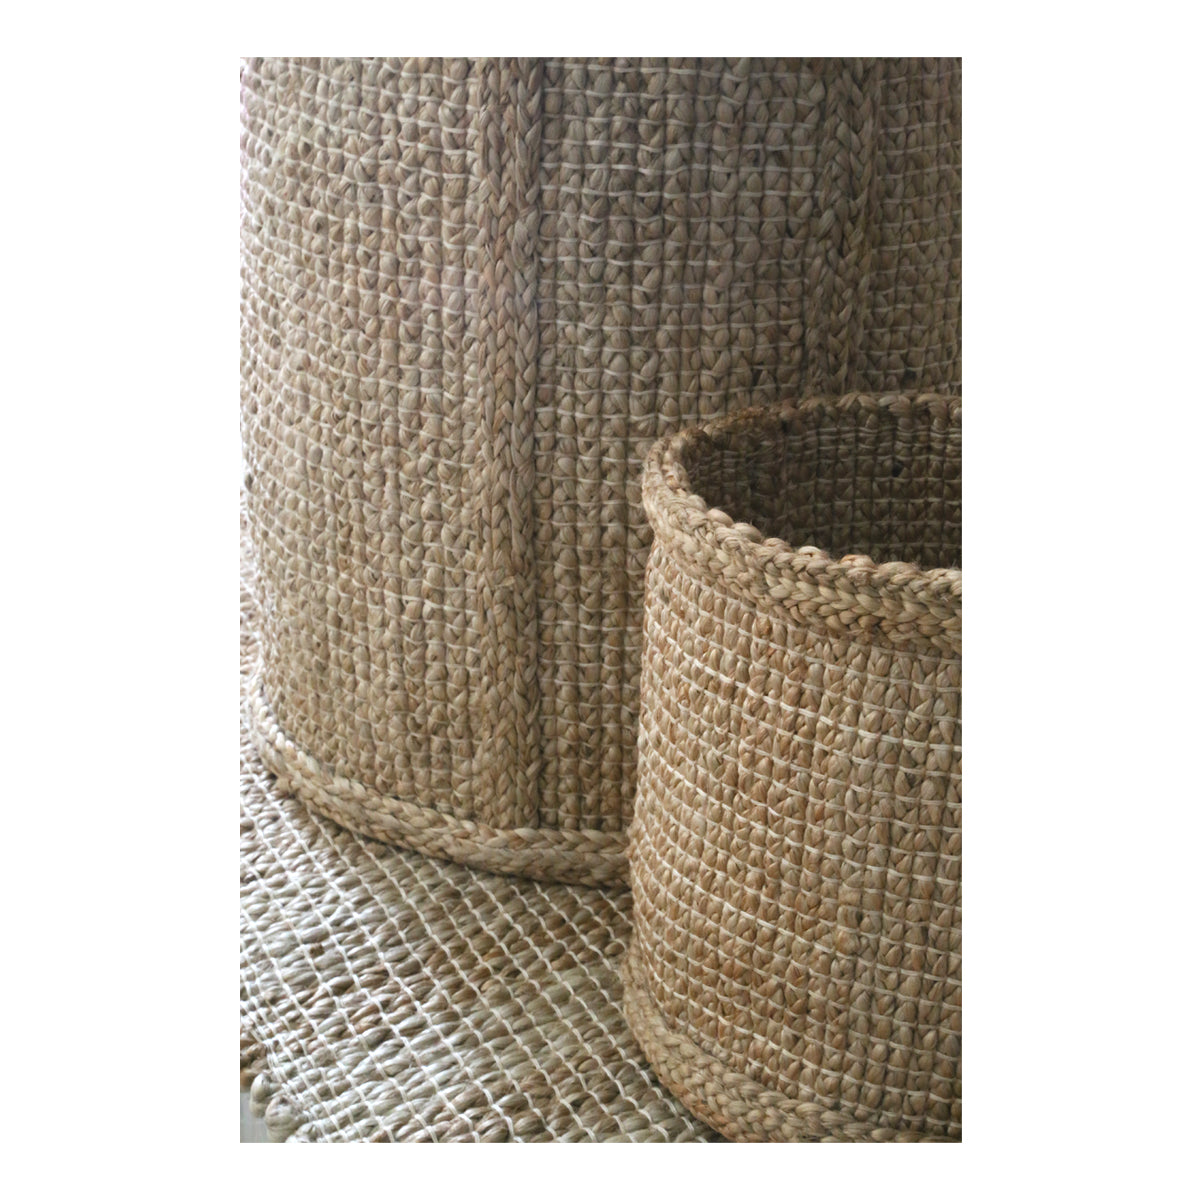 Tall Jute Basket with Handles, Natural Hatched Weave